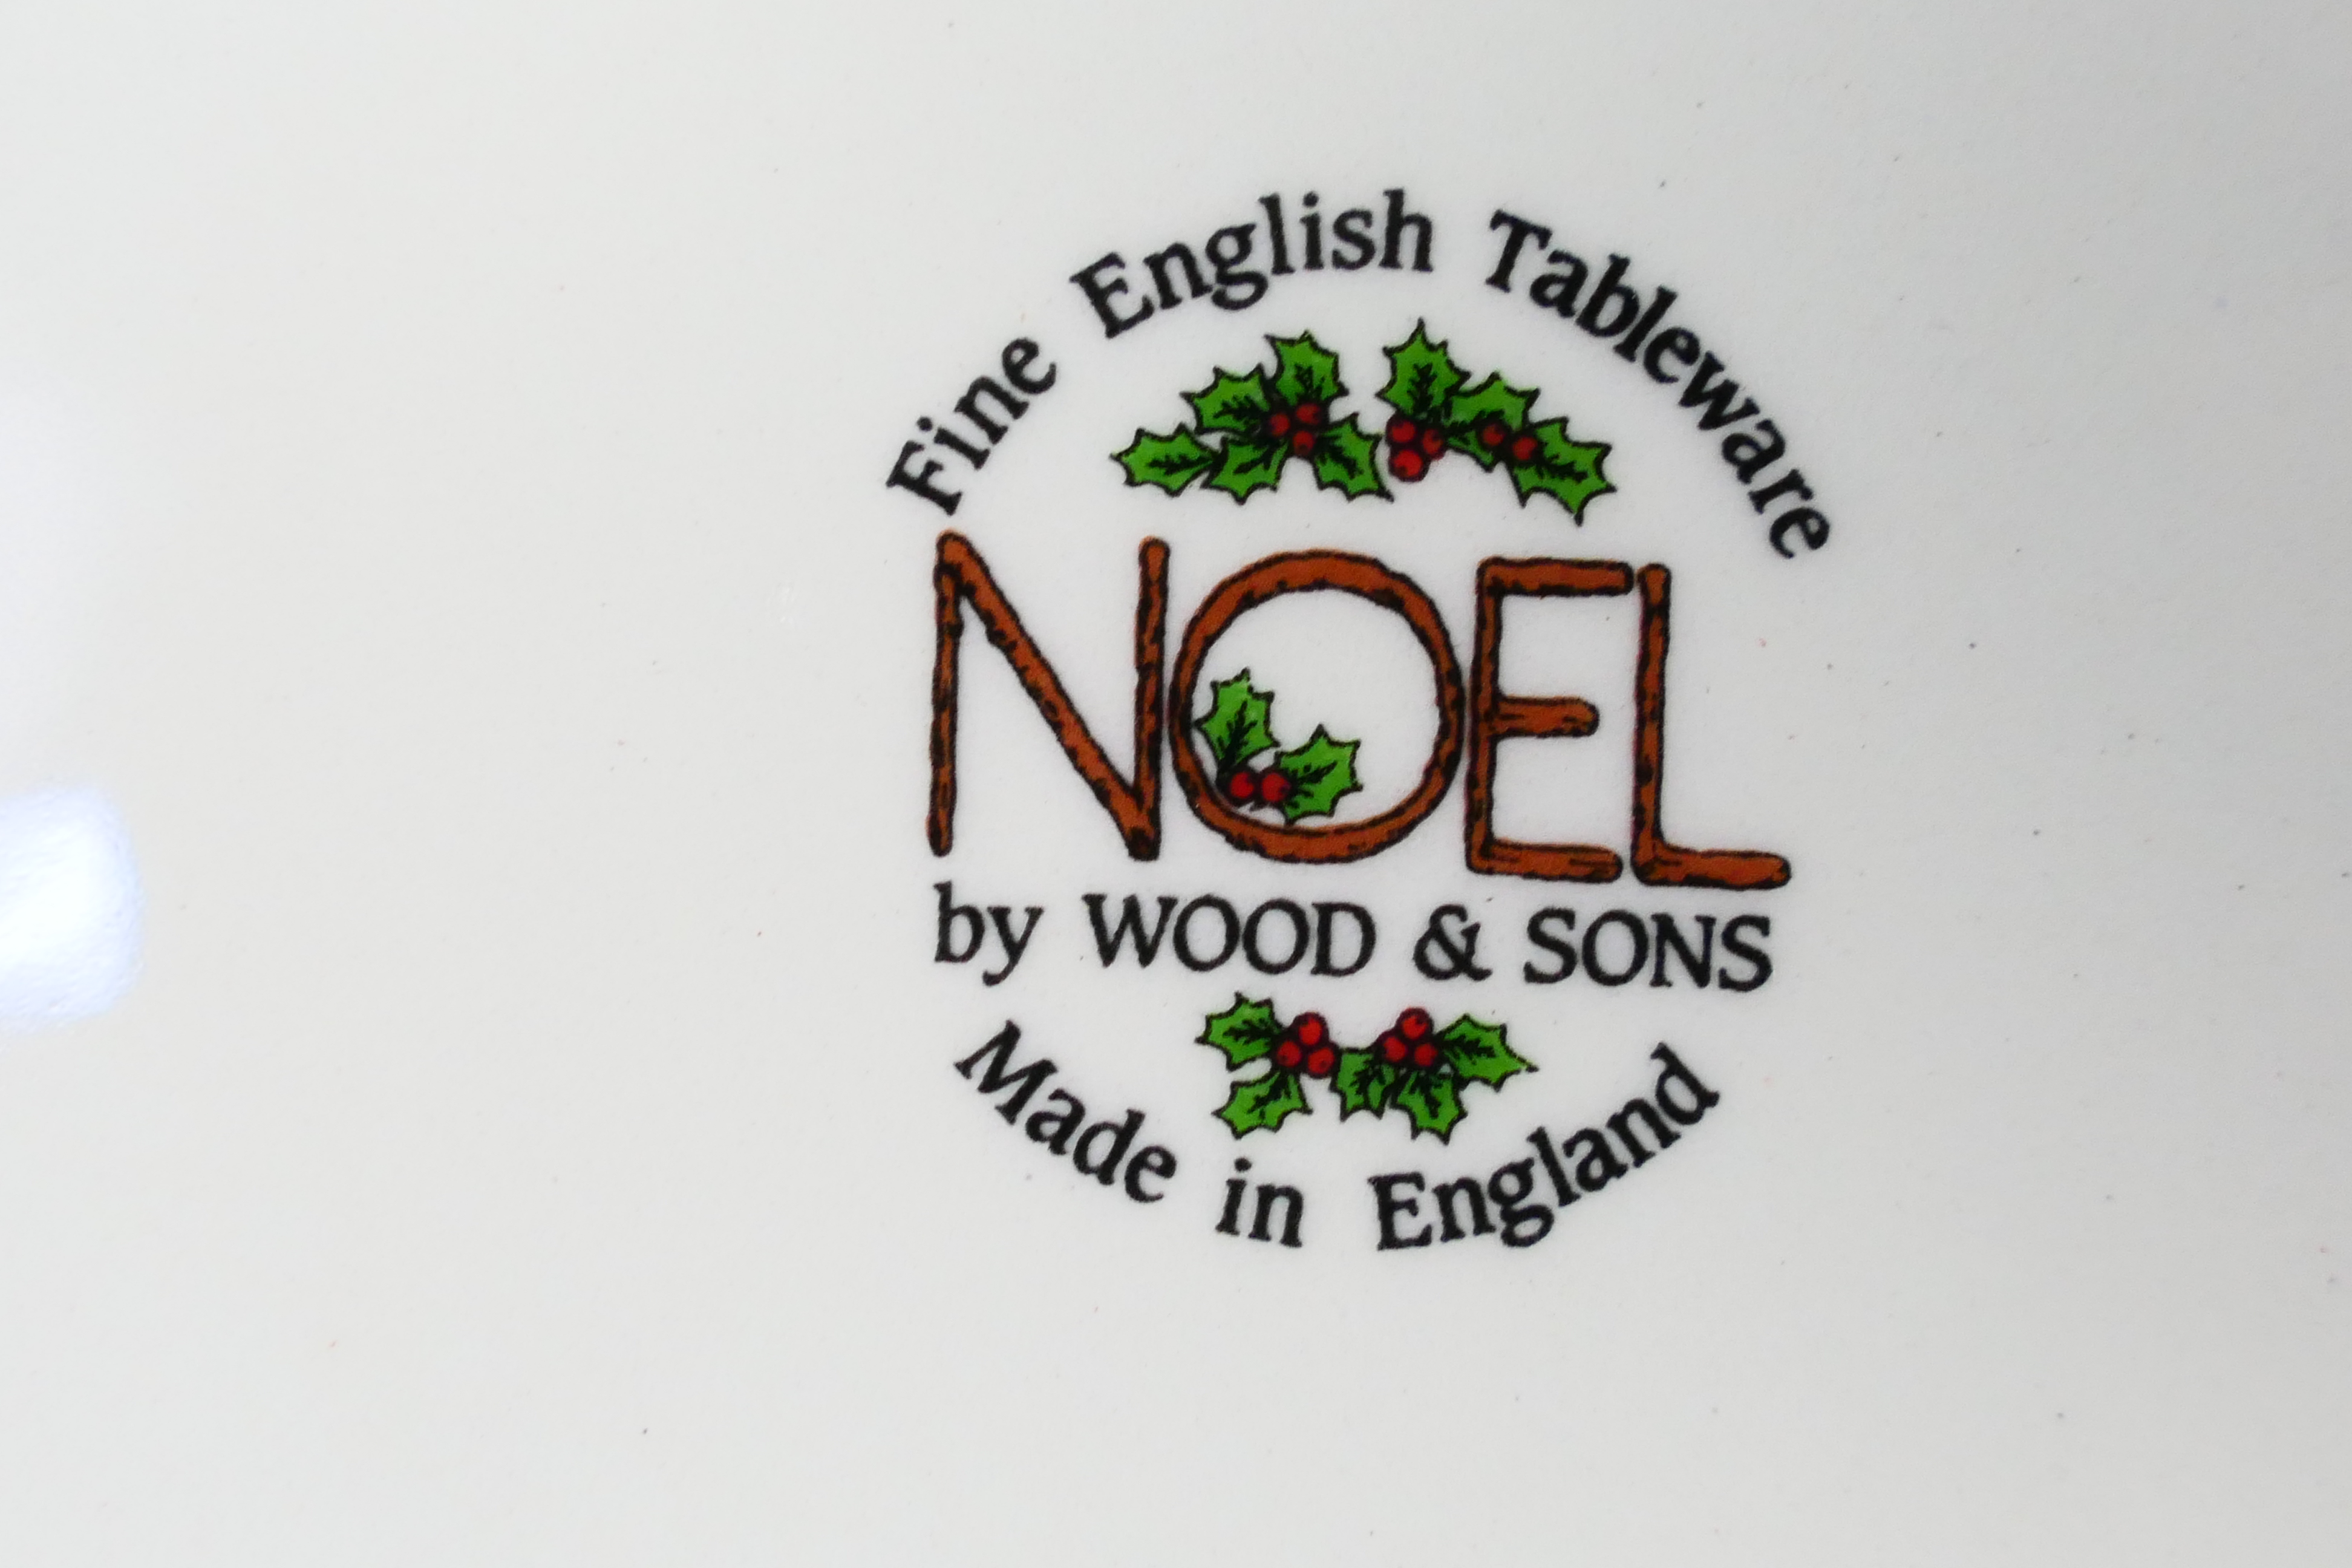 Noel By Wood and Sons, Baratts - A Noel ceramic tea service with holly patterns - Lot includes cups, - Image 7 of 7